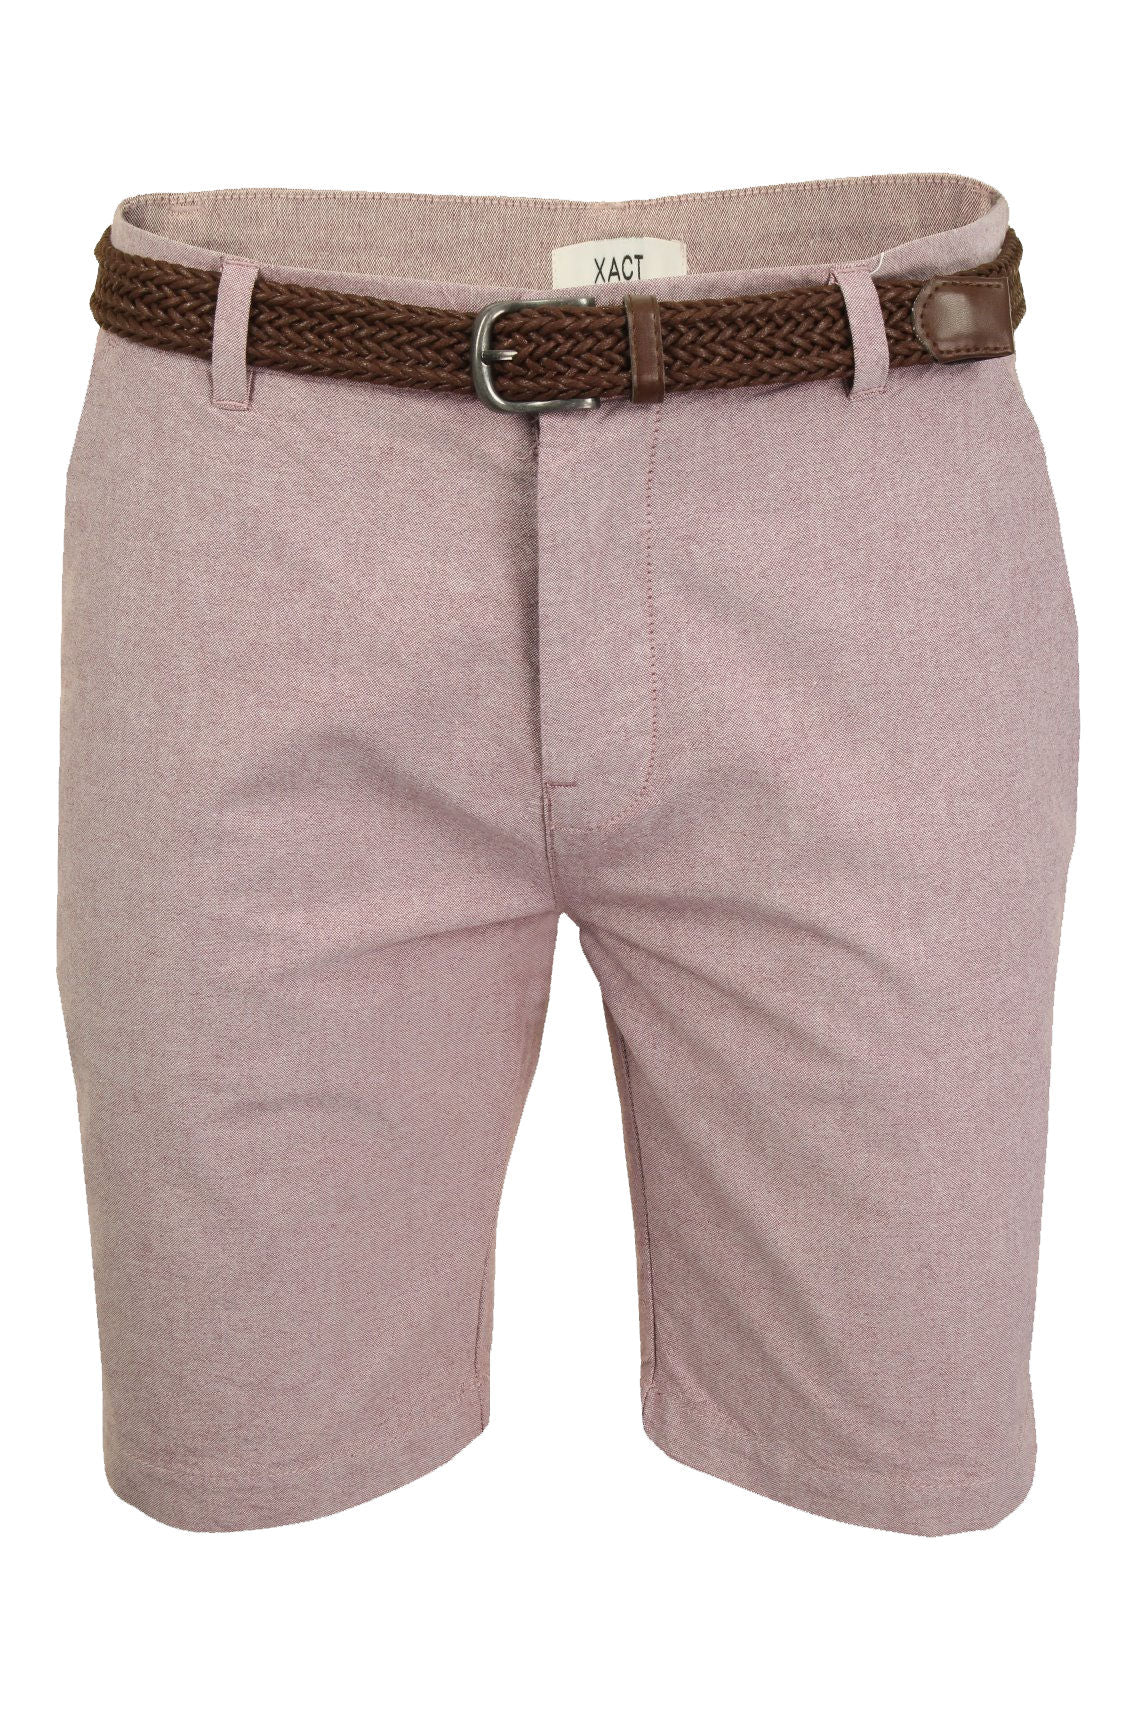 Xact Mens Oxford Chino Shorts with Belt, 01, Xsrt1029, Oxford Pink (Brown Belt)